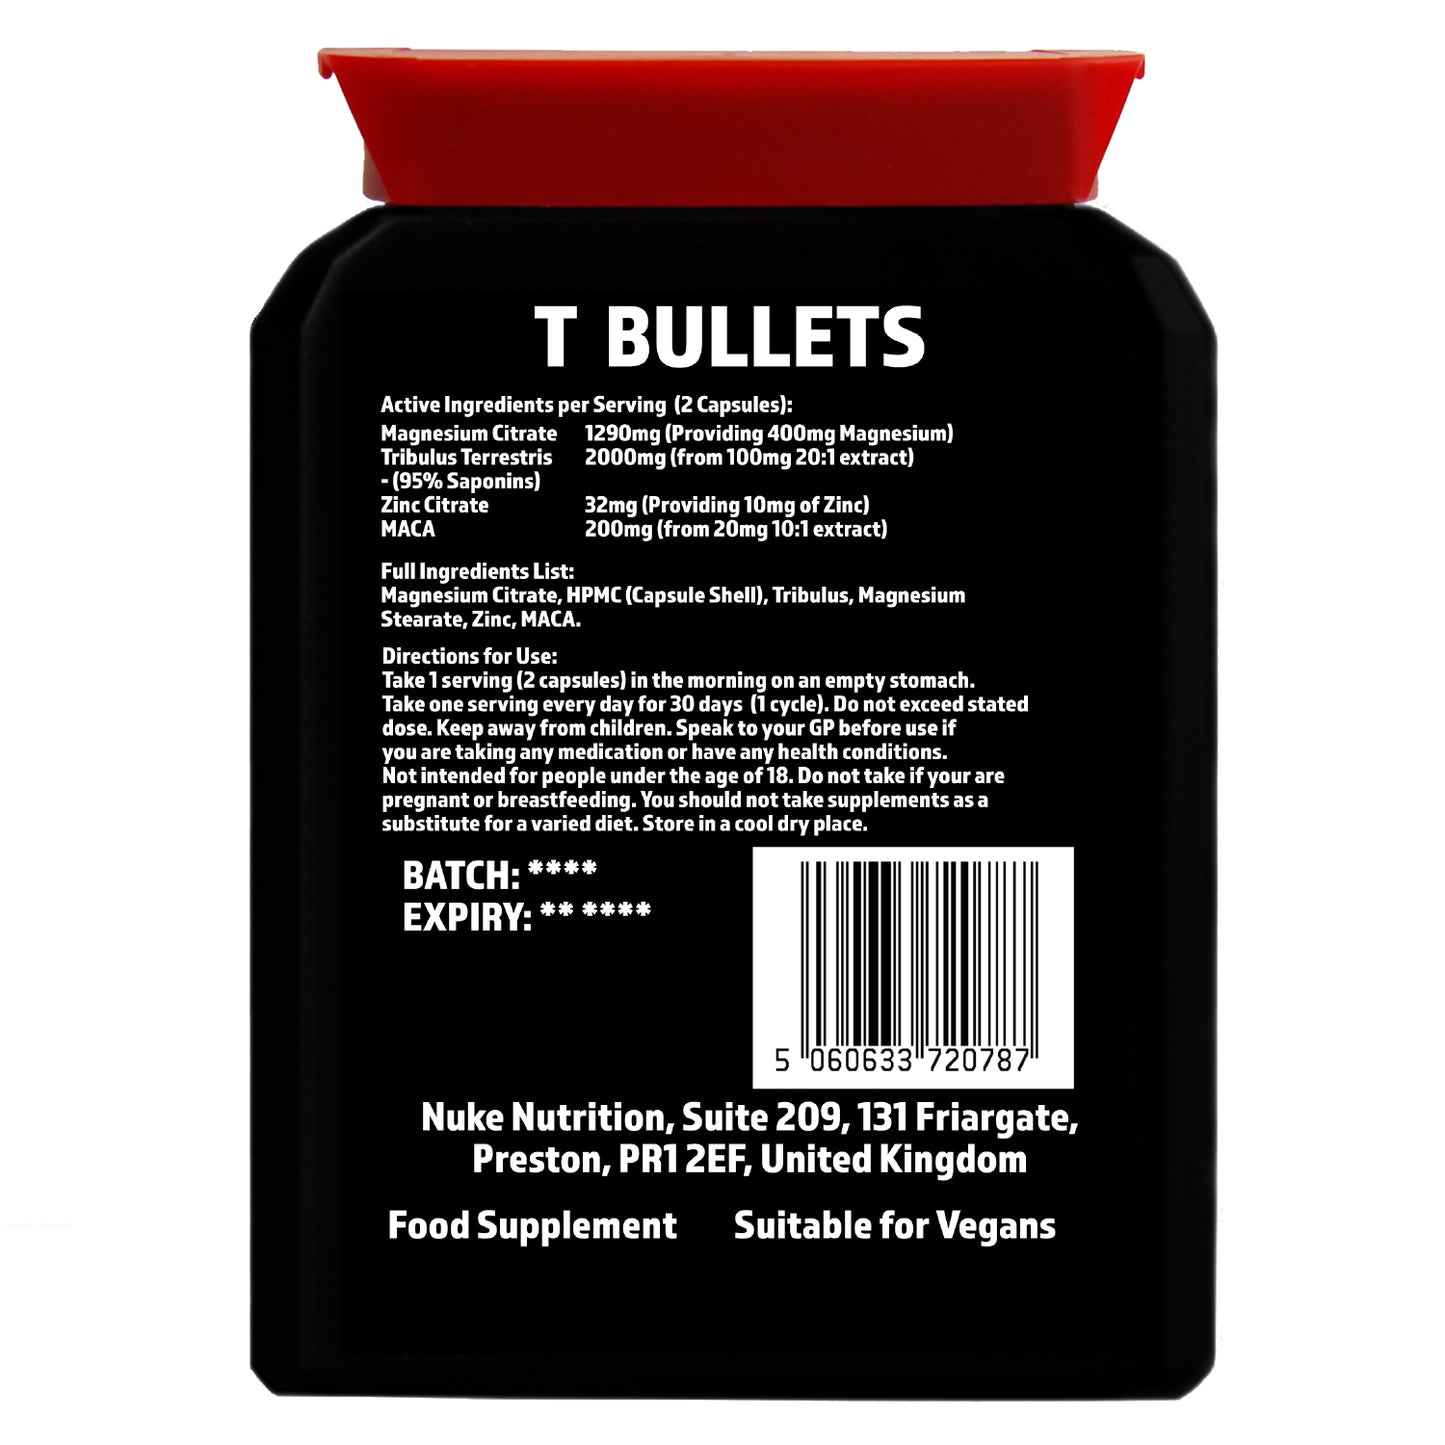 Testosterone Booster Stack Extreme Strength Monthly Cycle Bundle - T Bullets - PCT - Milk Thistle 4000mg